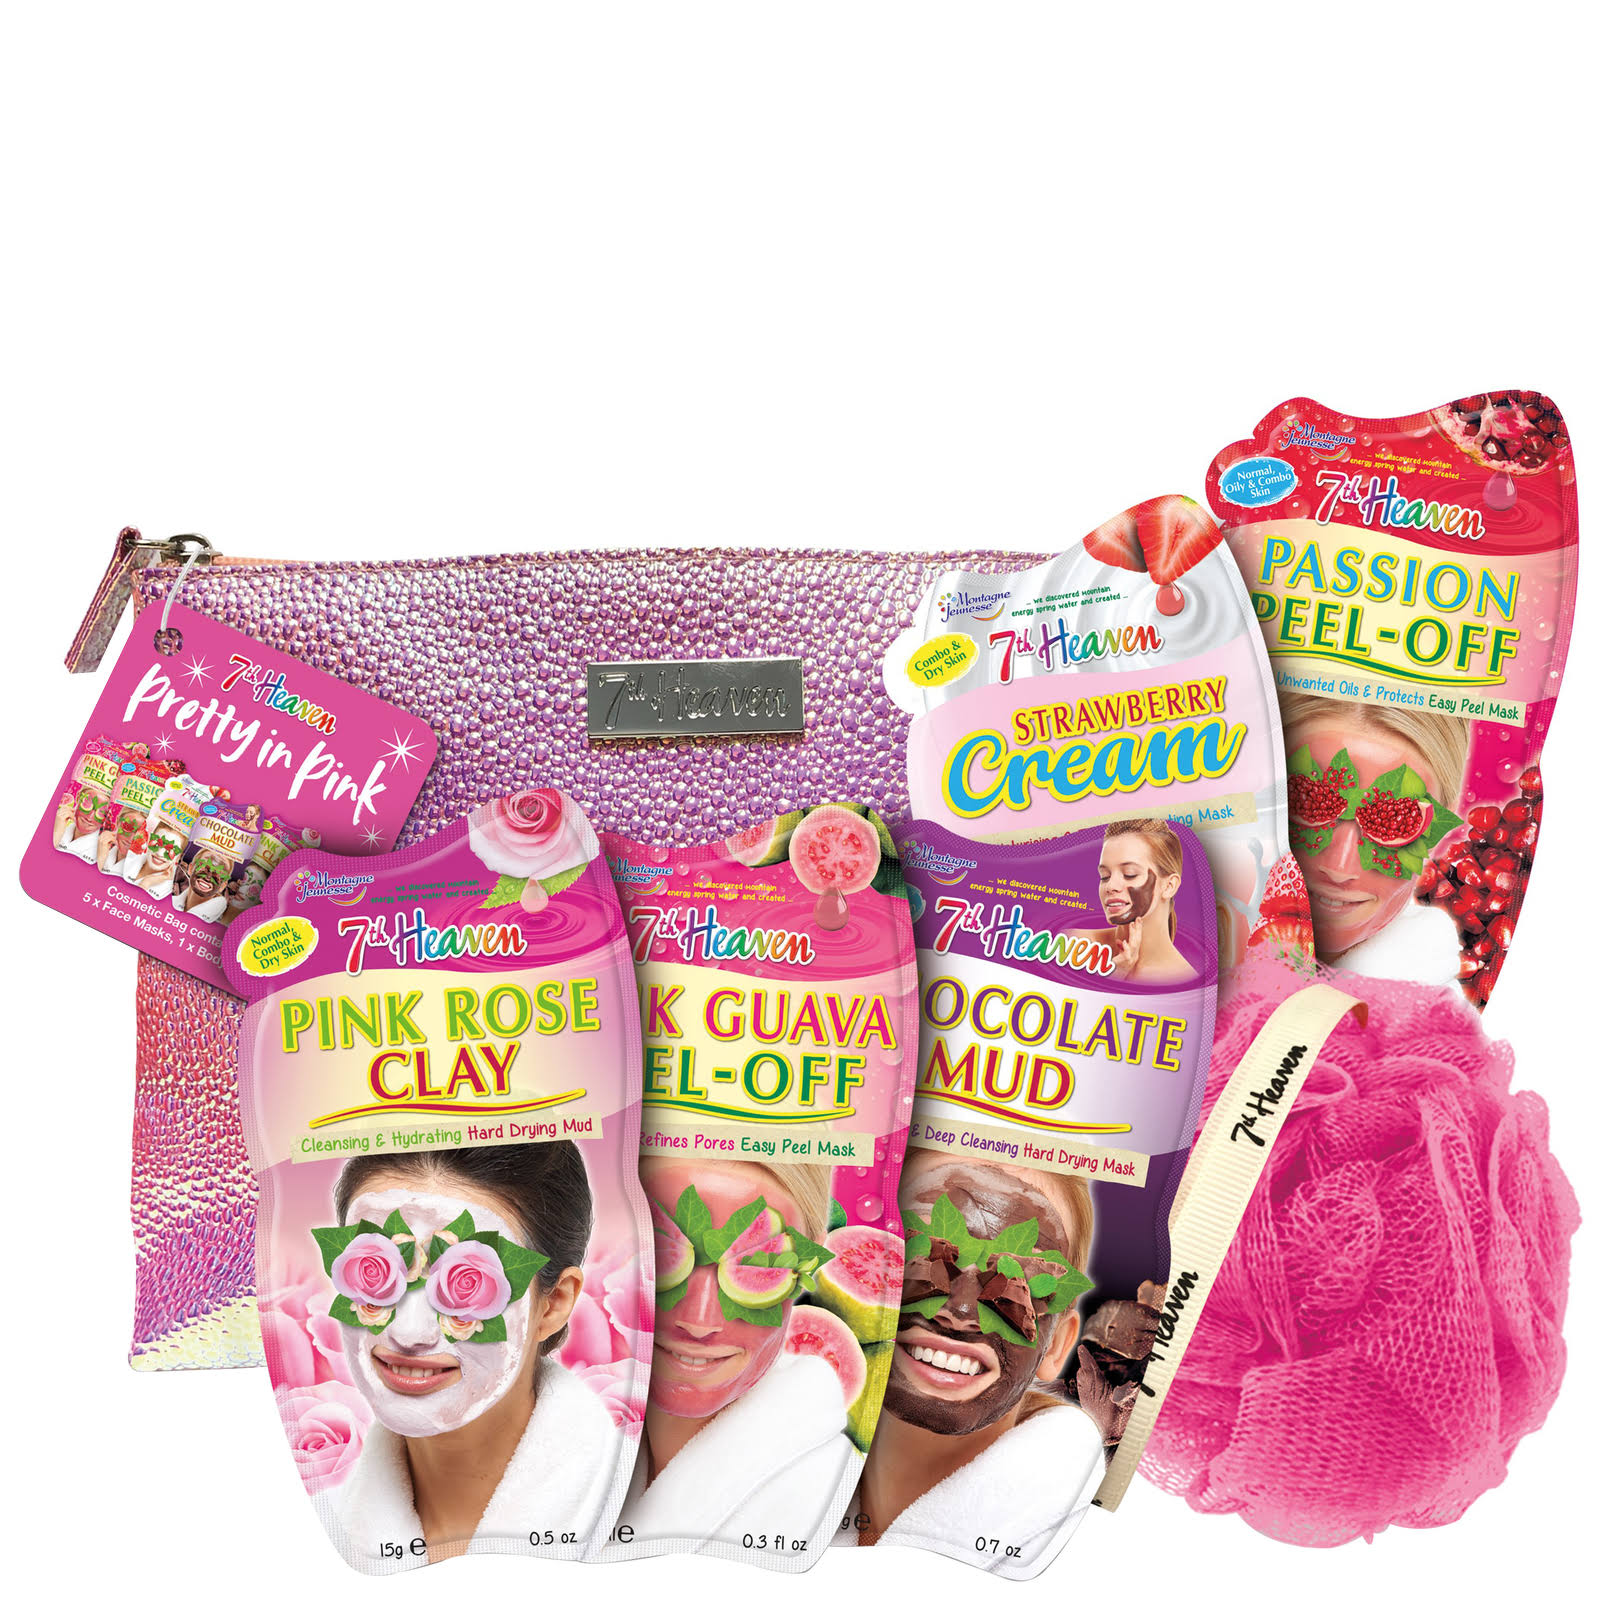 7th Heaven - Pretty in Pink Gift Set